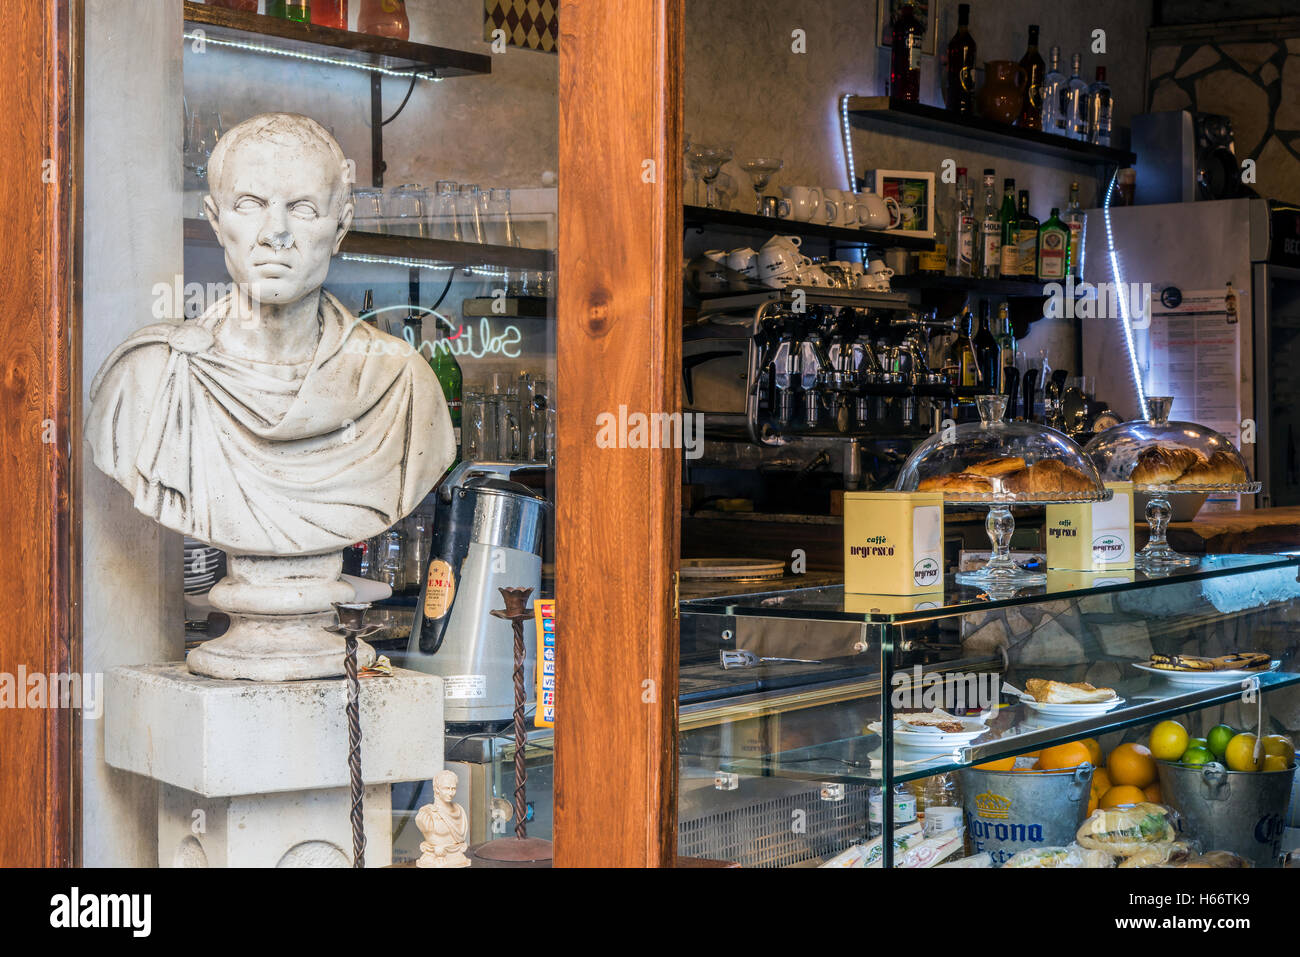 Cafe with marble bust of Julius Caesar emperor in Trastevere district, Rome, Lazio, Italy Stock Photo